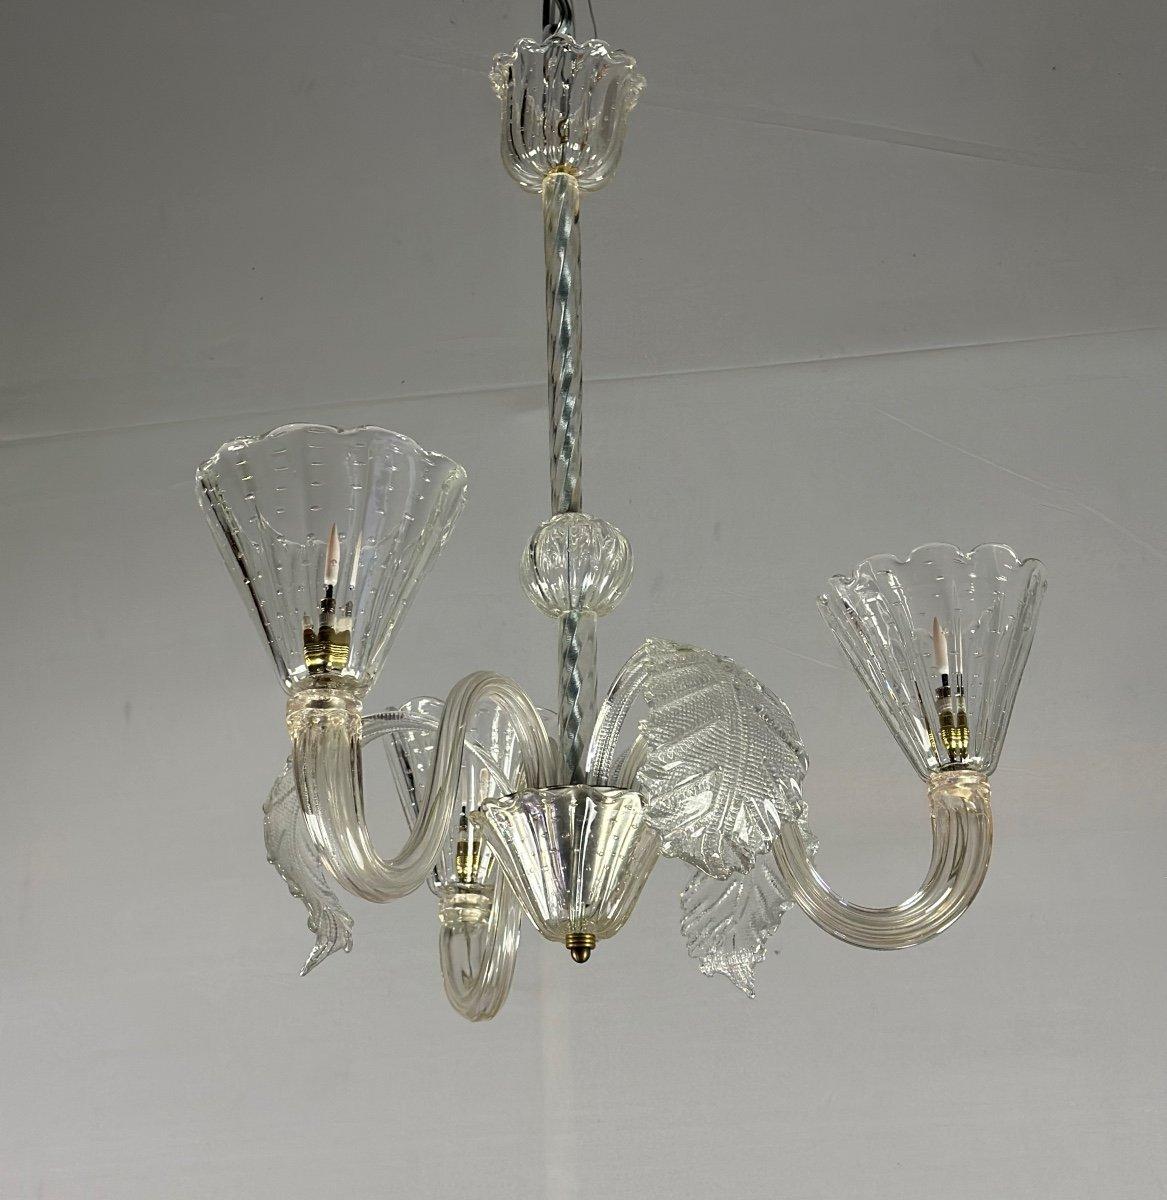 Venetian chandelier in Murano glass, 3 arms of light, new electrification